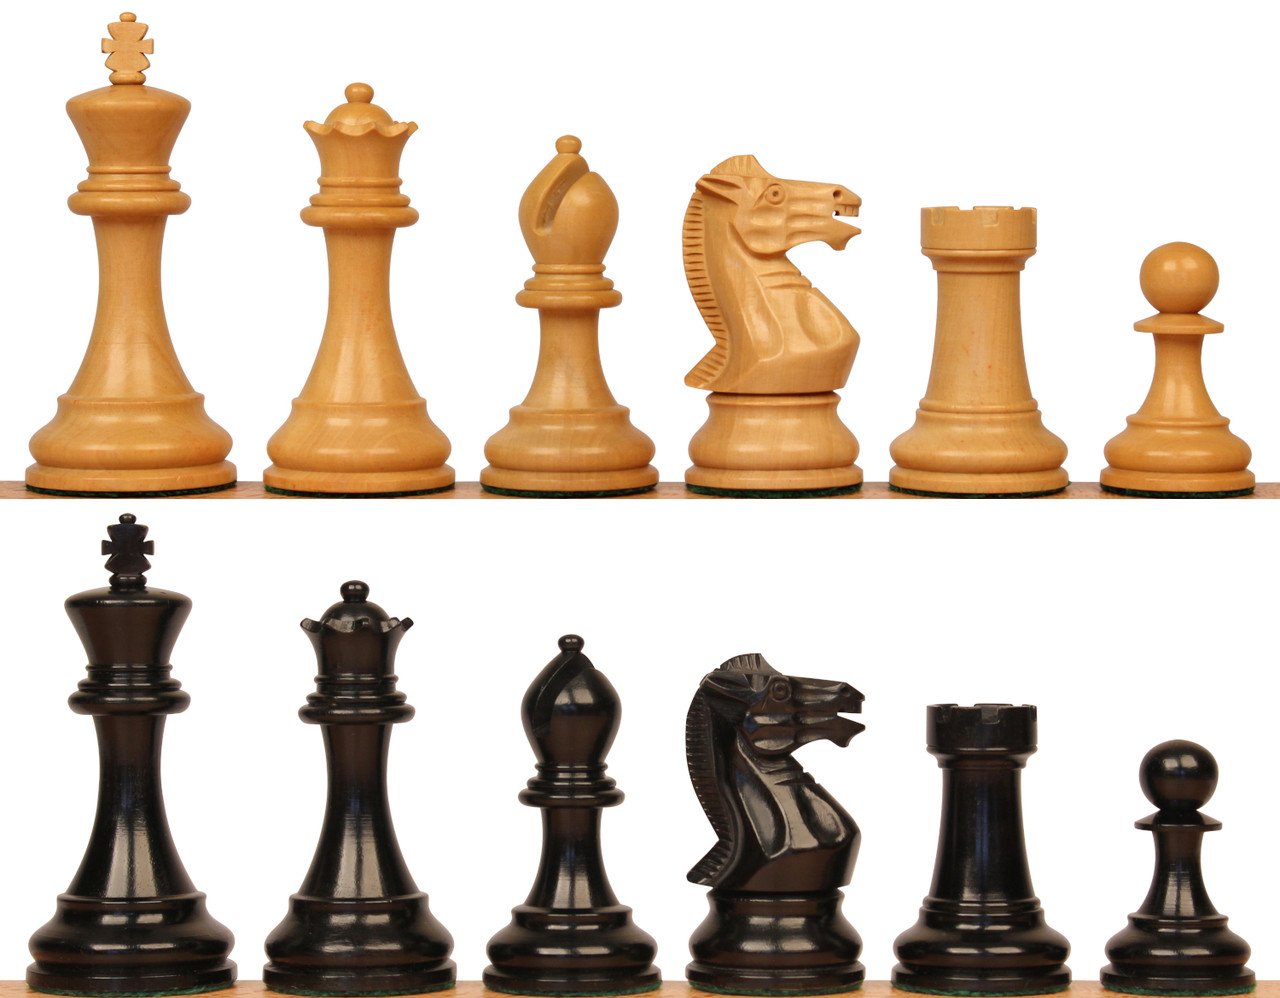 Name of Chess Pieces - English and Spanish - Openclipart